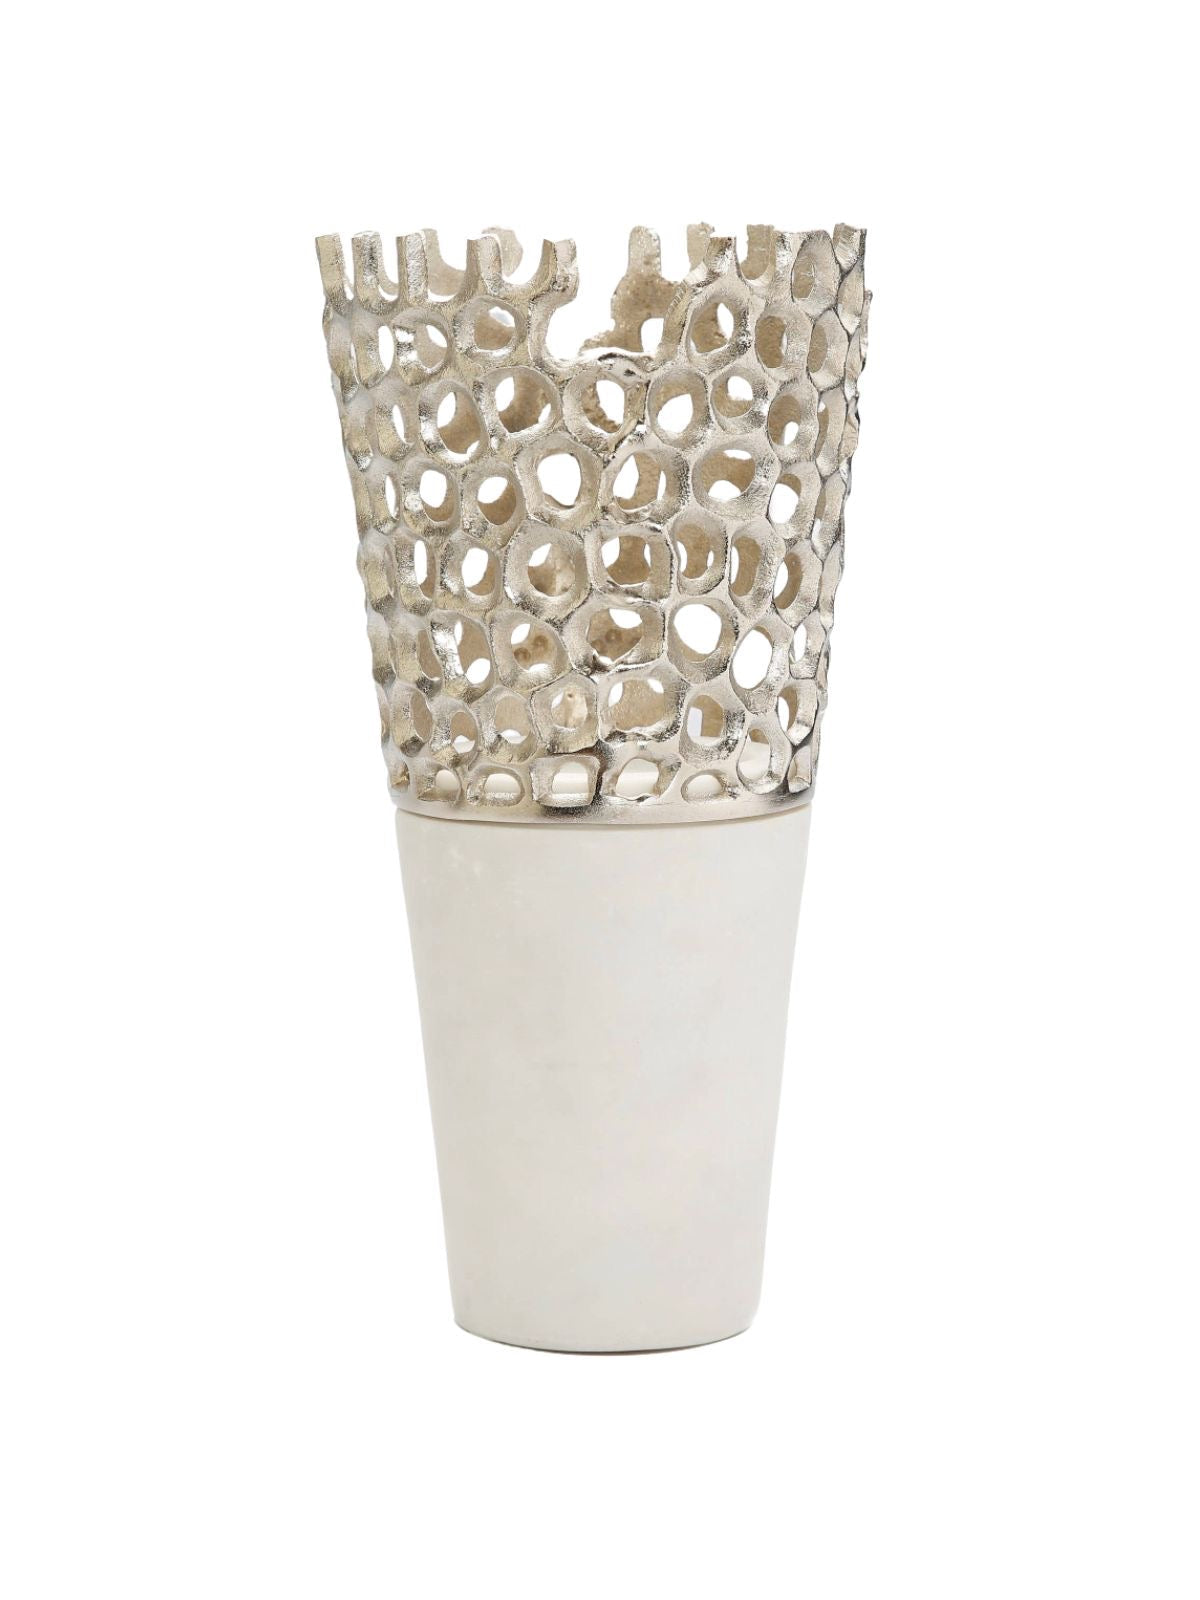 Luxury White Marble Decorative Vase With Silver Cut Out Design 12H - KYA Home Decor. 